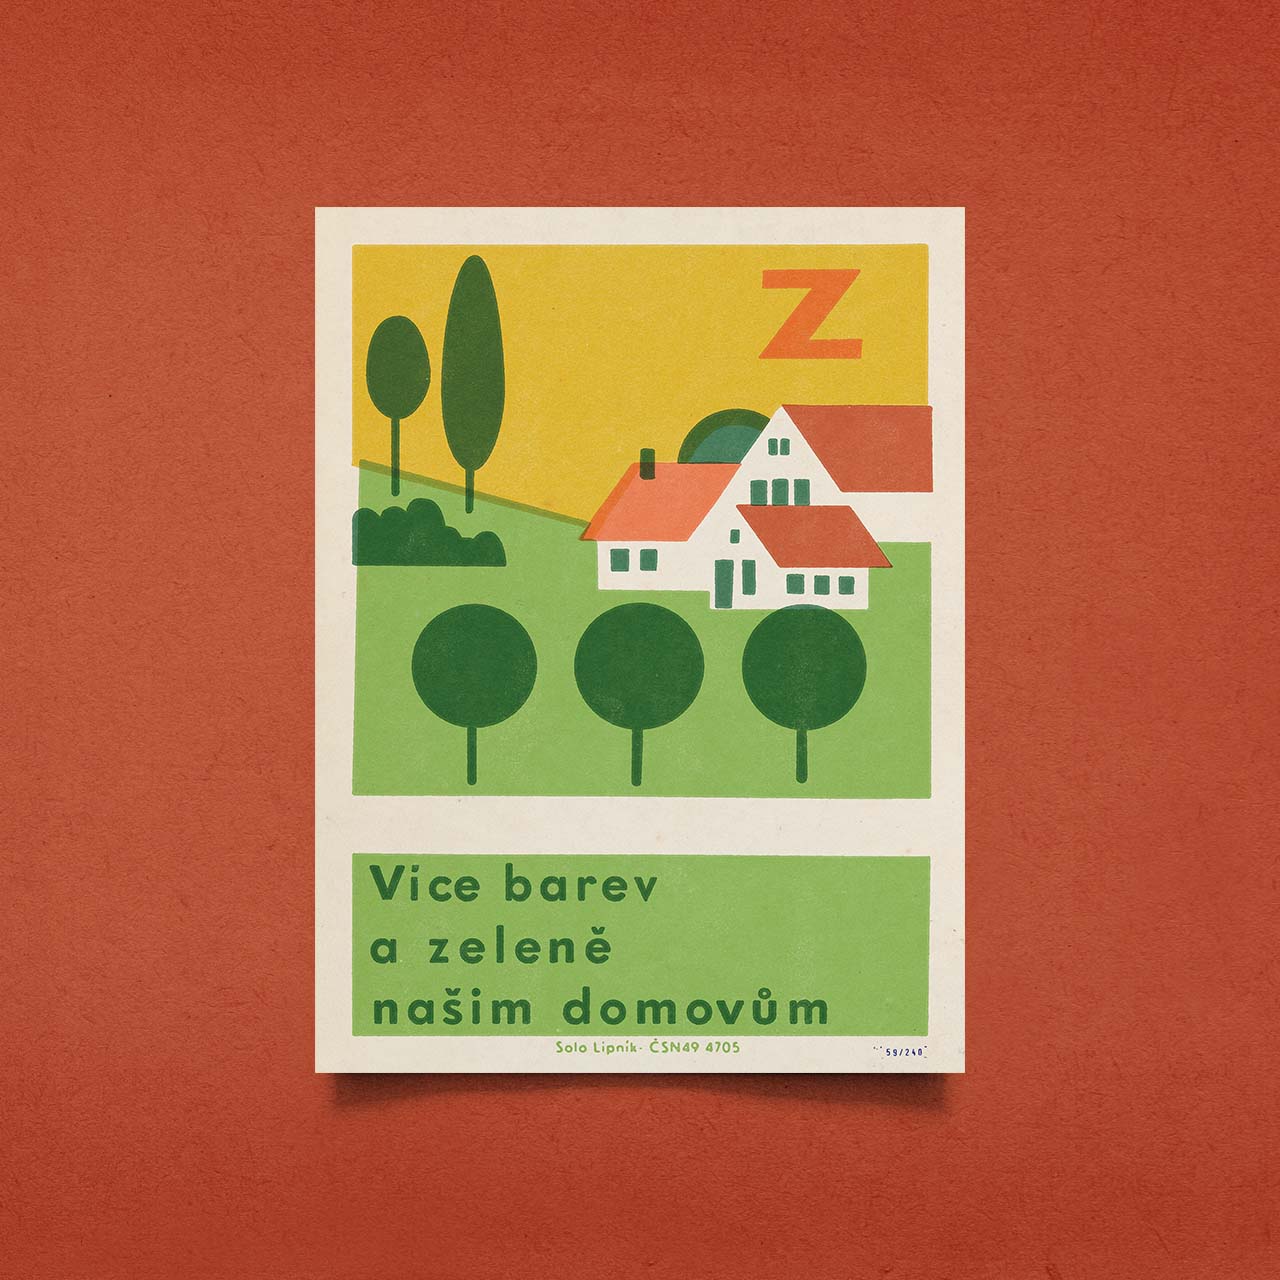 More colors and greenery to our homes - Poster 30x40 cm 